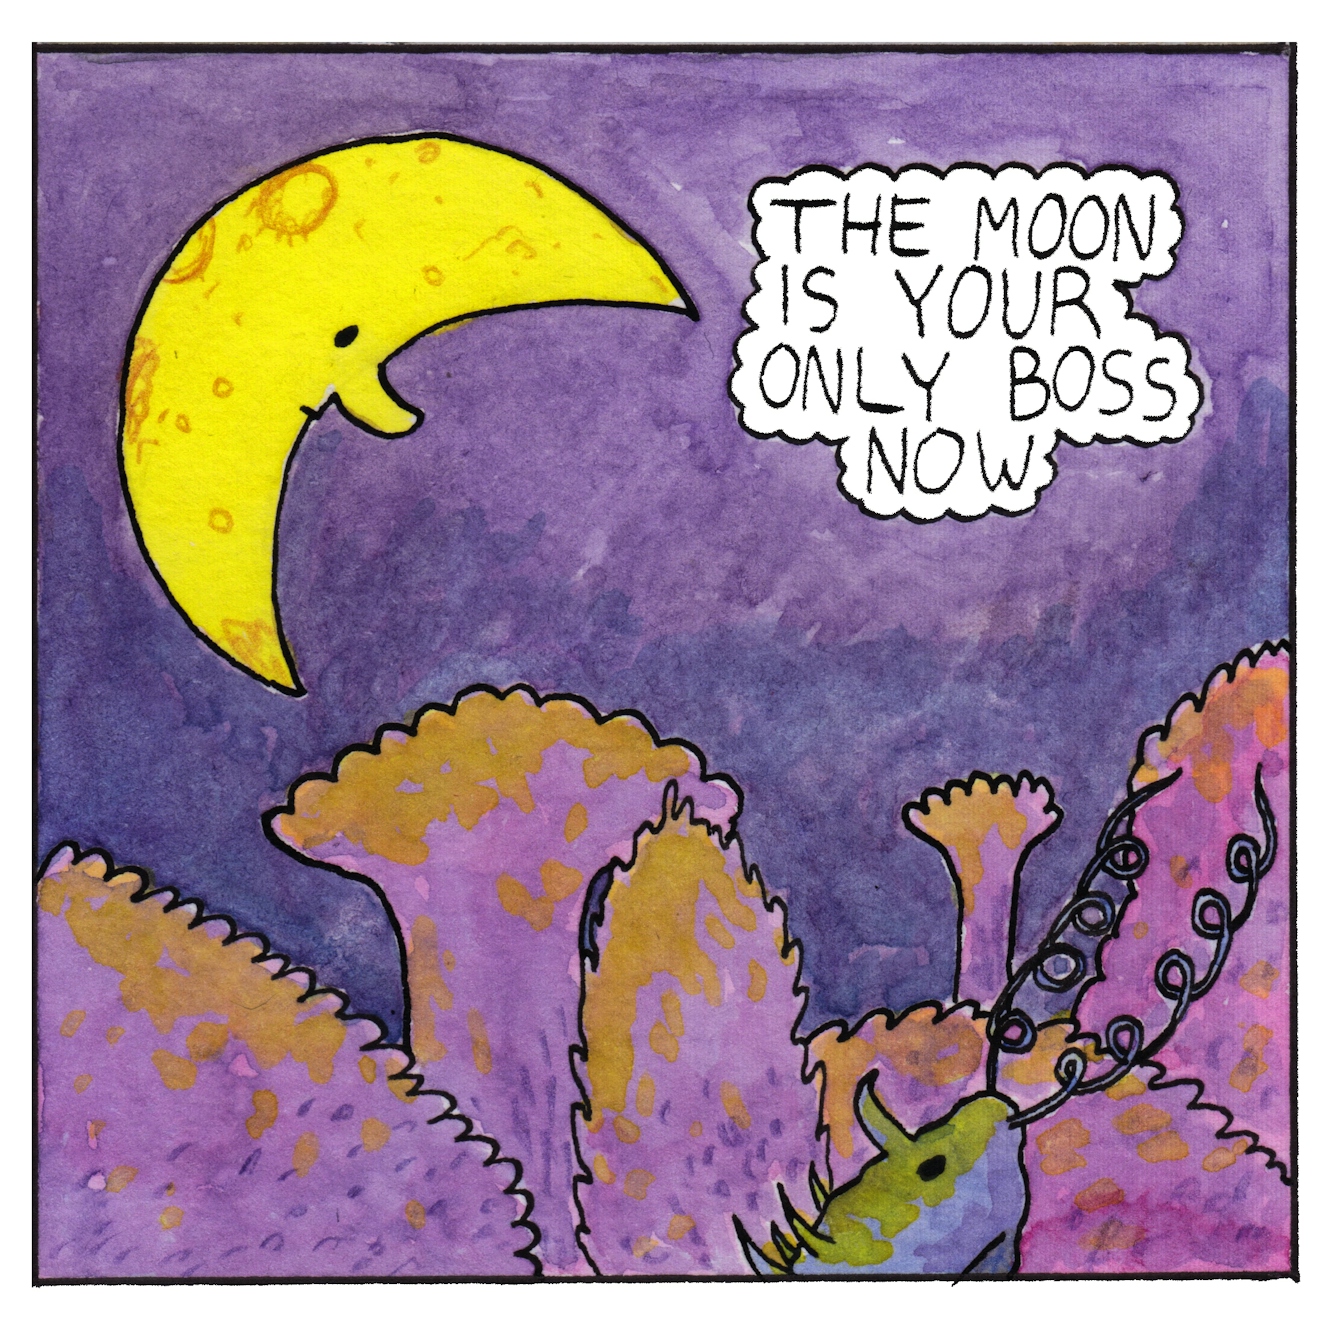 Panel 6 of a six-panel comic made with ink, watercolour and colour pencils:  A yellow crescent moon, with a face in profile, fills the left quarter of the panel. It looks down from the purple night-sky at the little blue bug, who is surrounded by vegetation, and gazing up at the moon. A text bubble in the sky reads: “The moon is your only boss now”